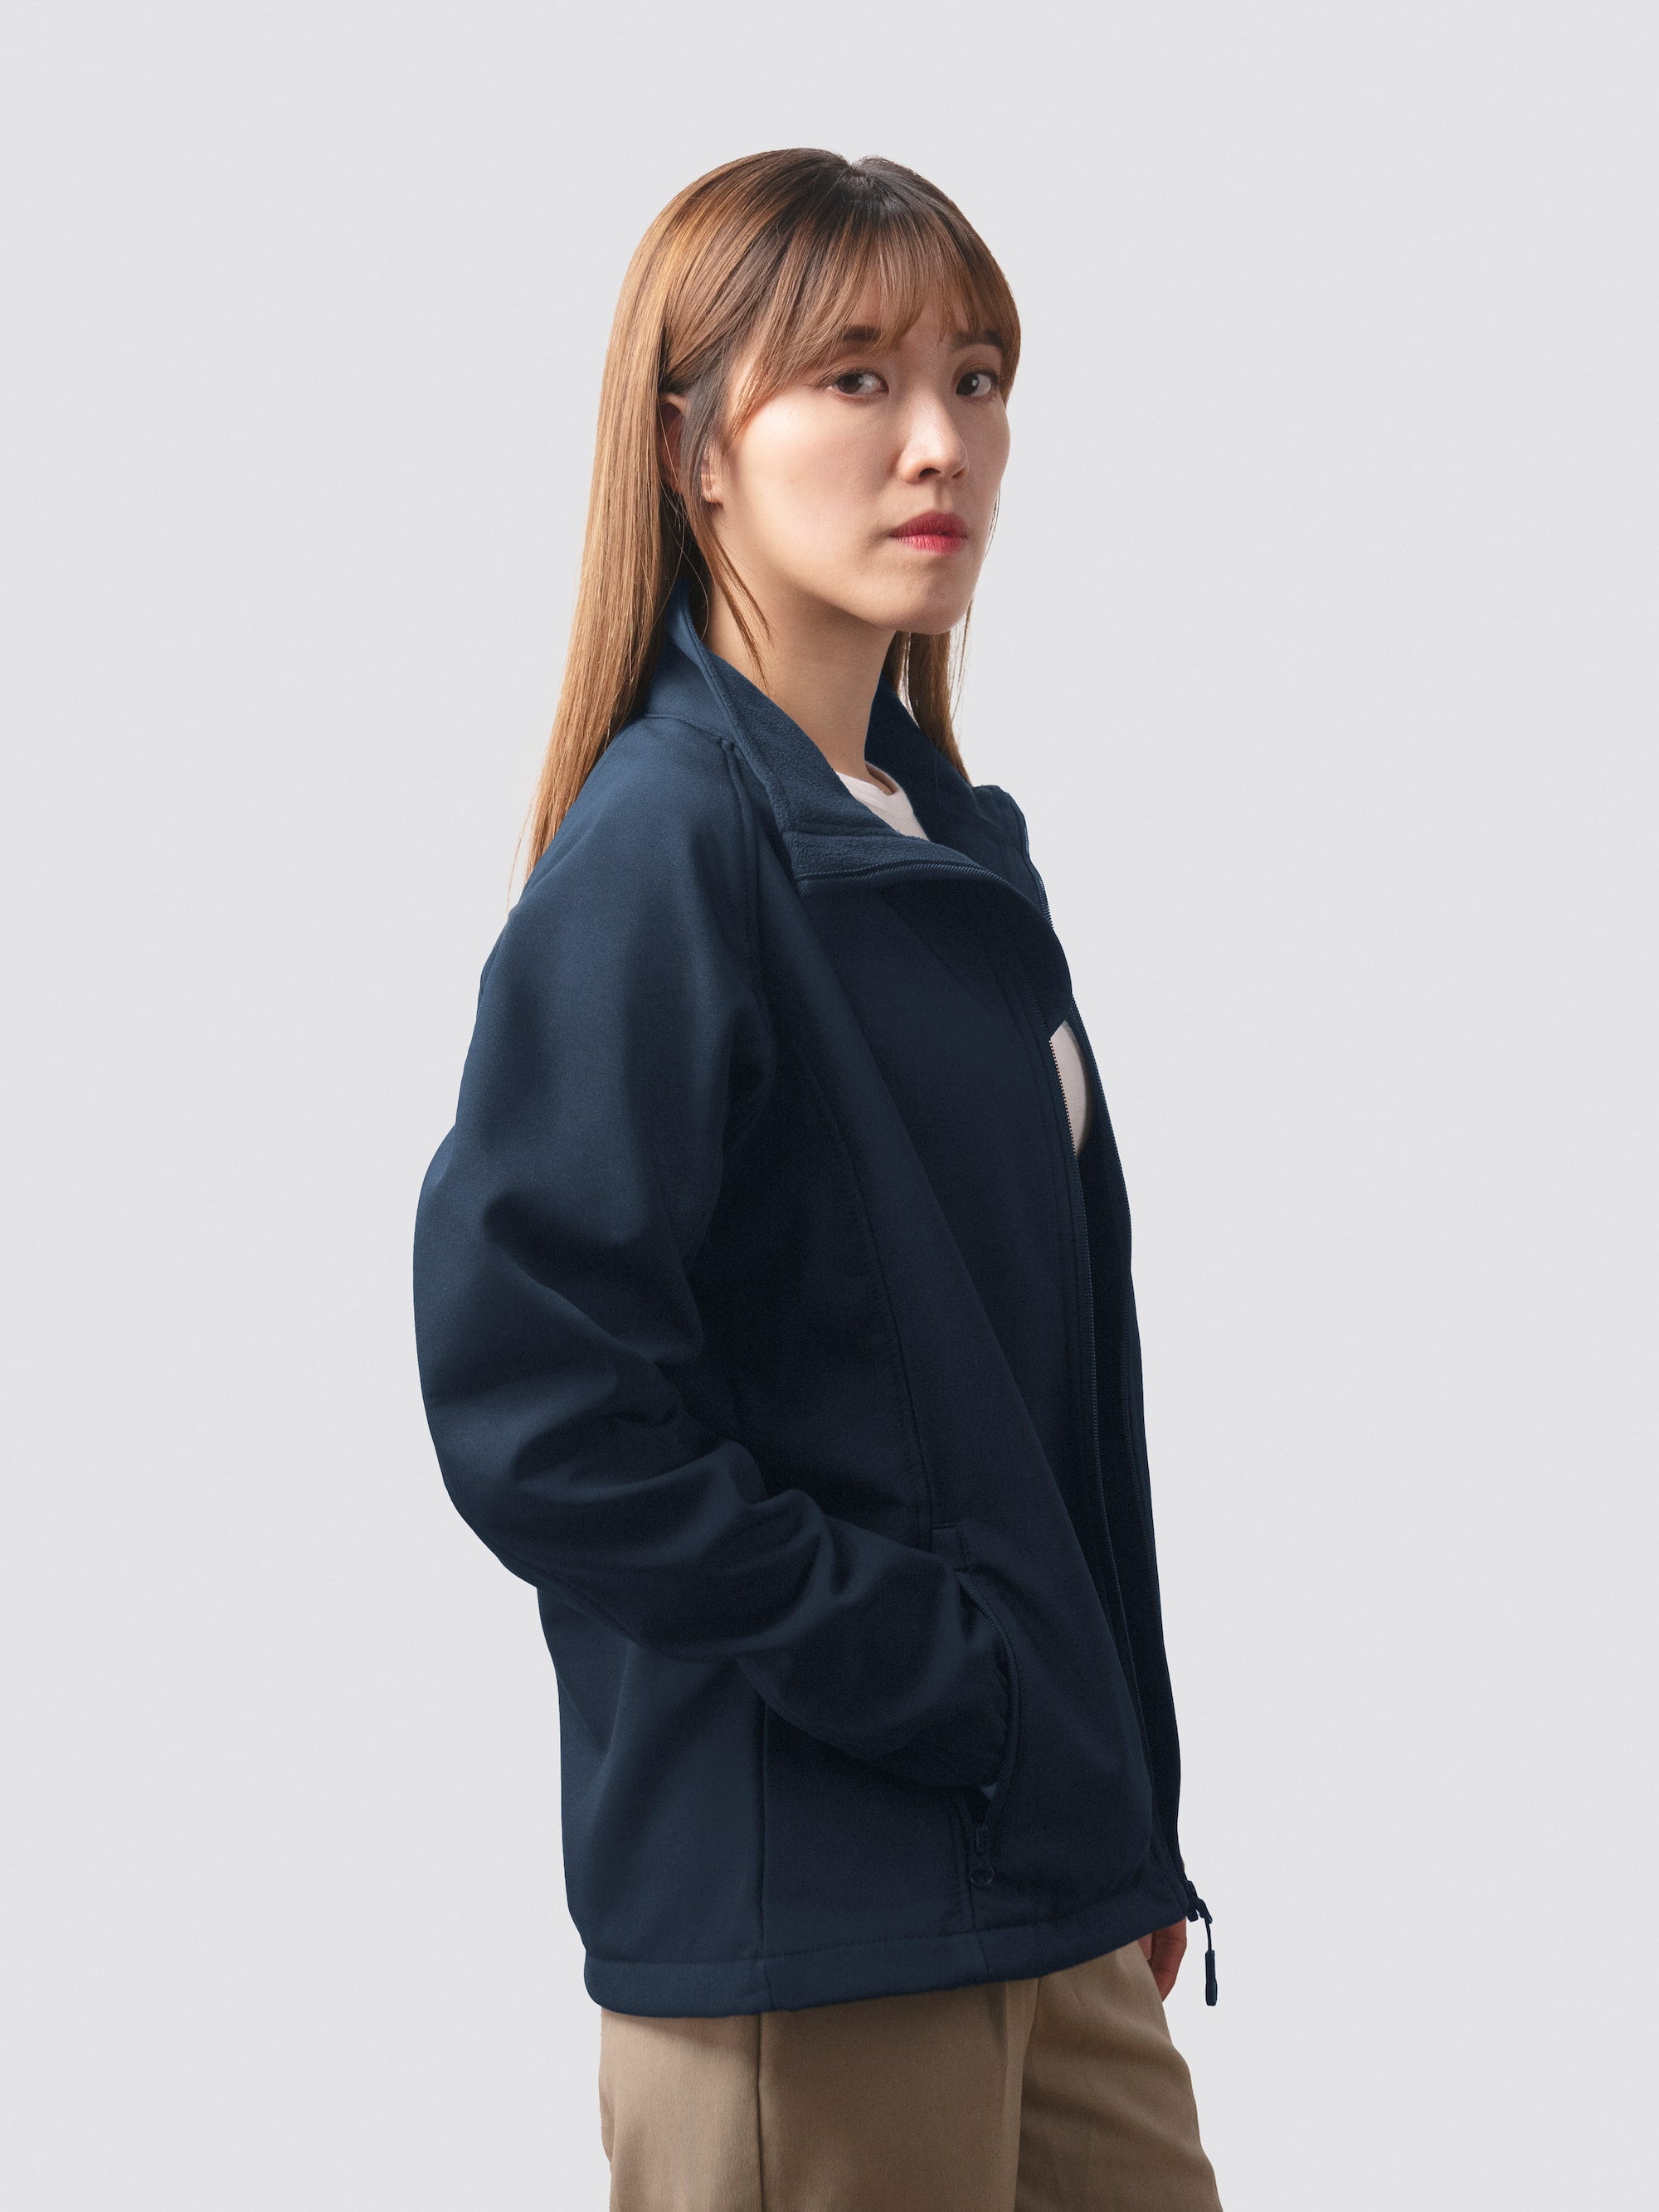 Navy waterproof jacket, made from recycled plastic bottles